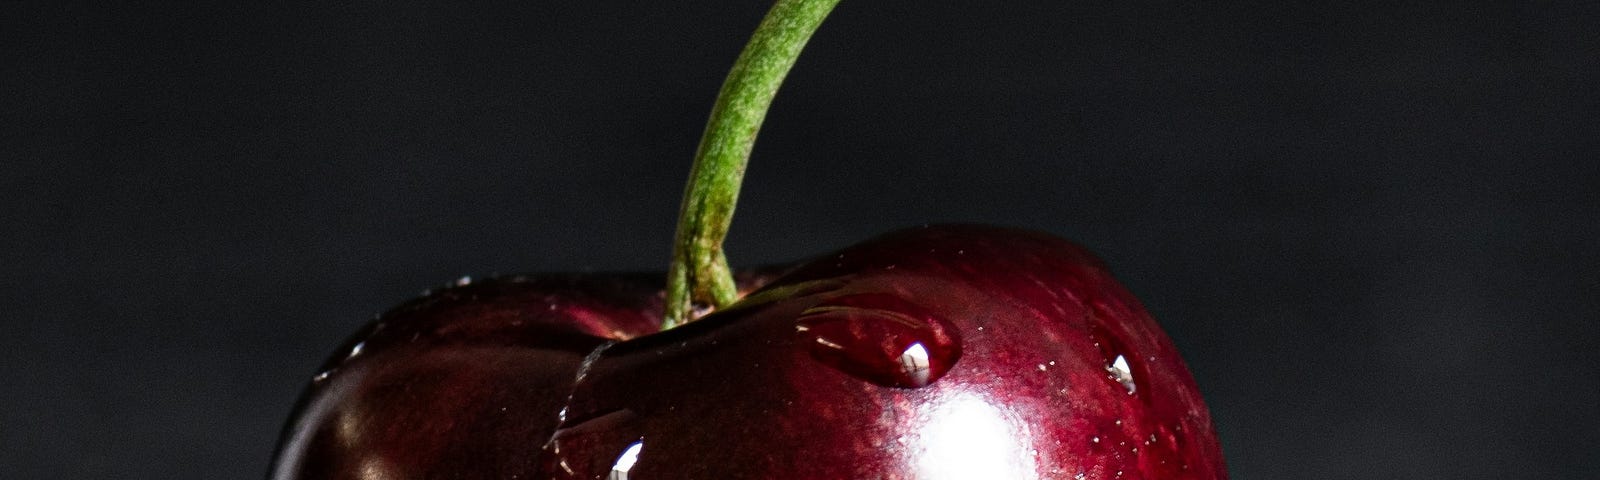 A cherry with stem